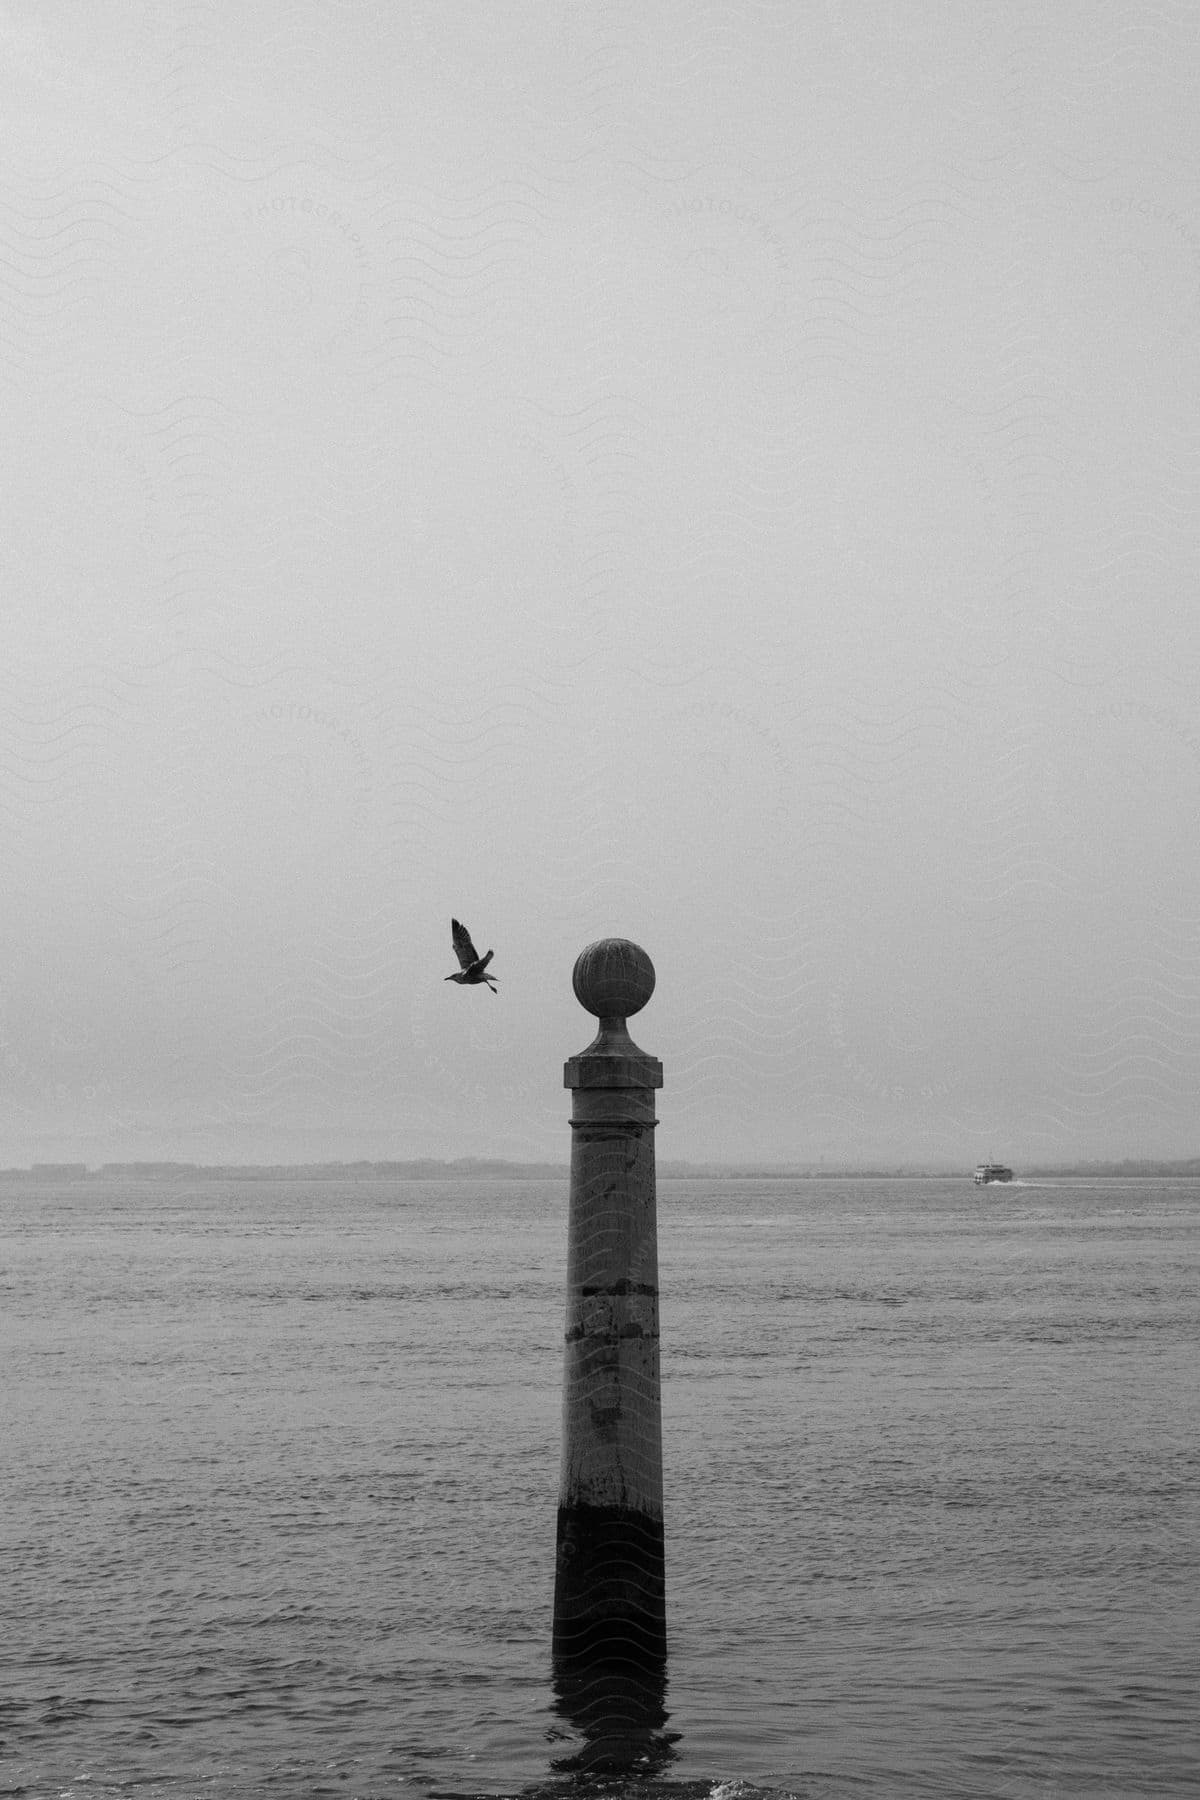 Lone post with a sphere on top in the middle of the ocean with a bird flying nearby.